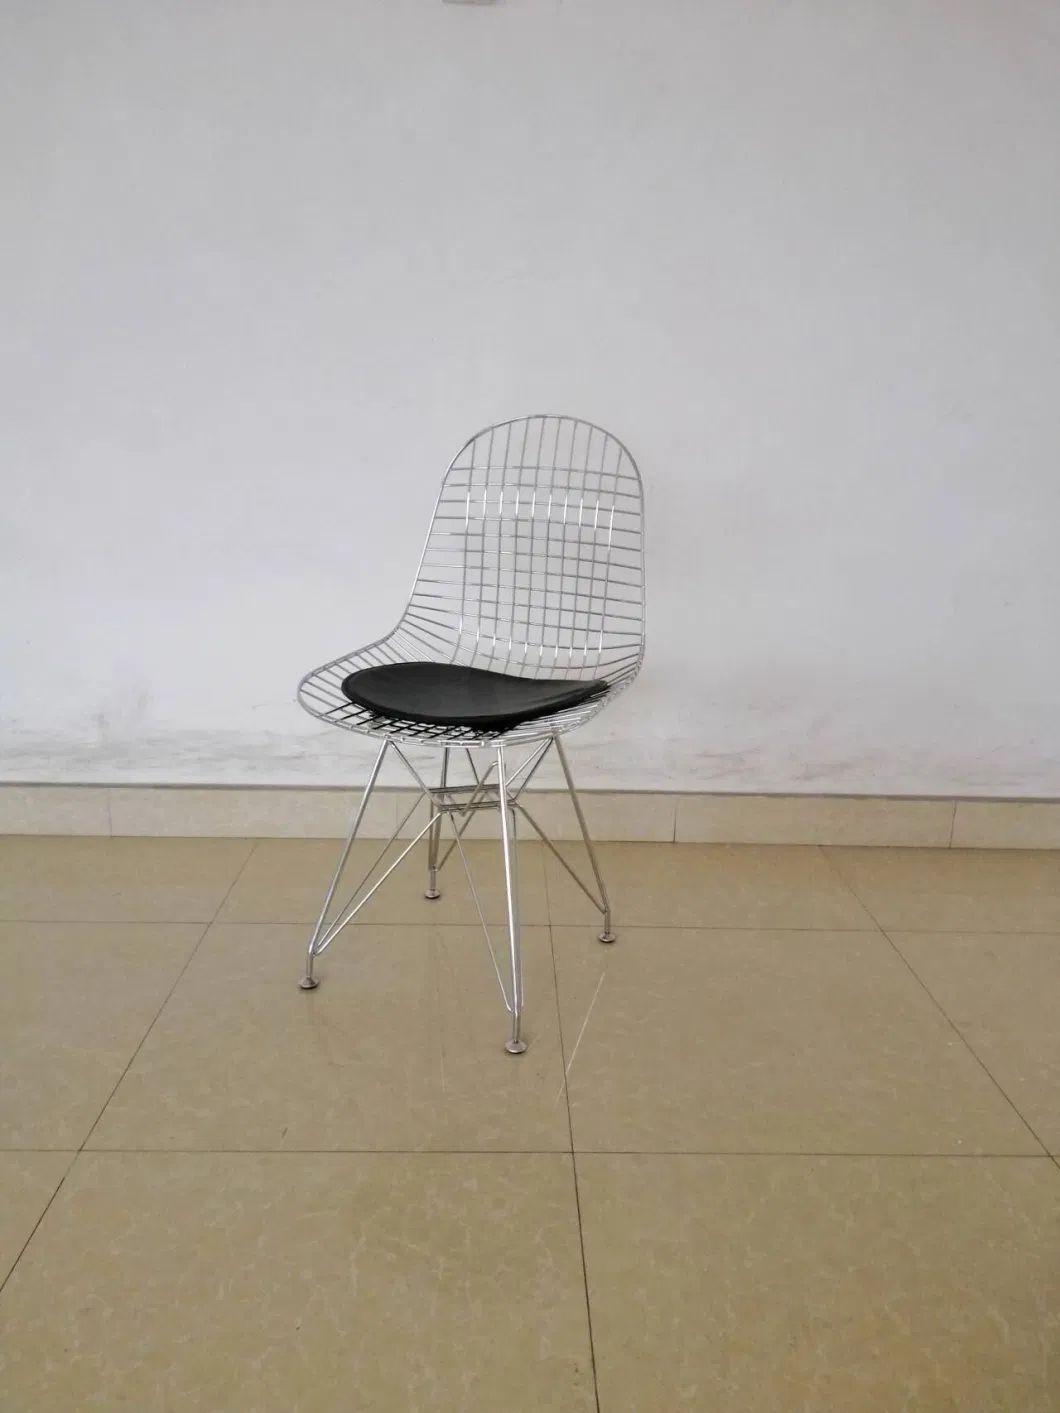 China Quality Furniture Manufacturer of Quality Welded Steel Wire Dining Chair